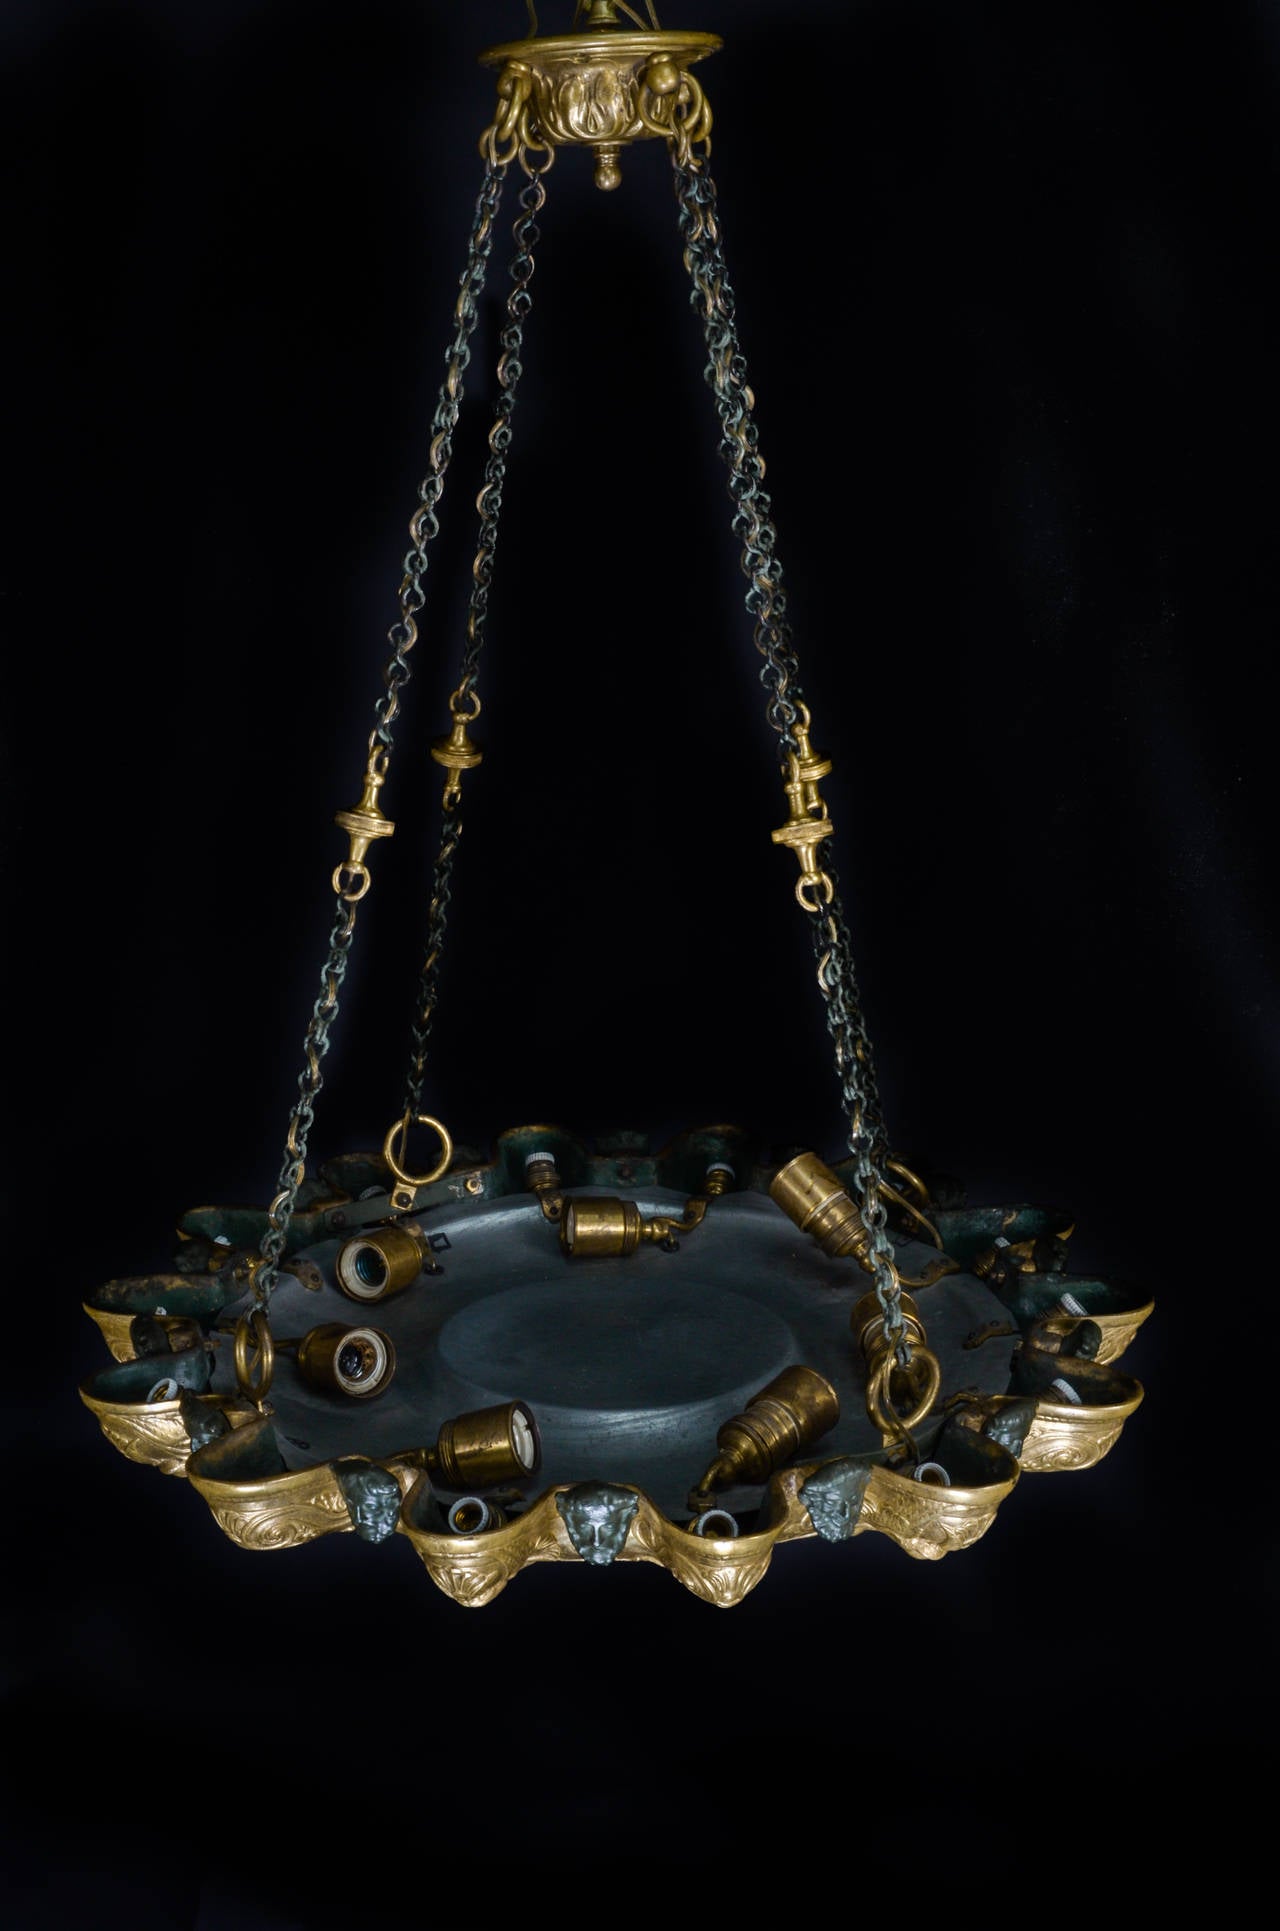 Unique Antique American Caldwell Neoclassical Gilt and Patina Bronze Chandelier For Sale 2